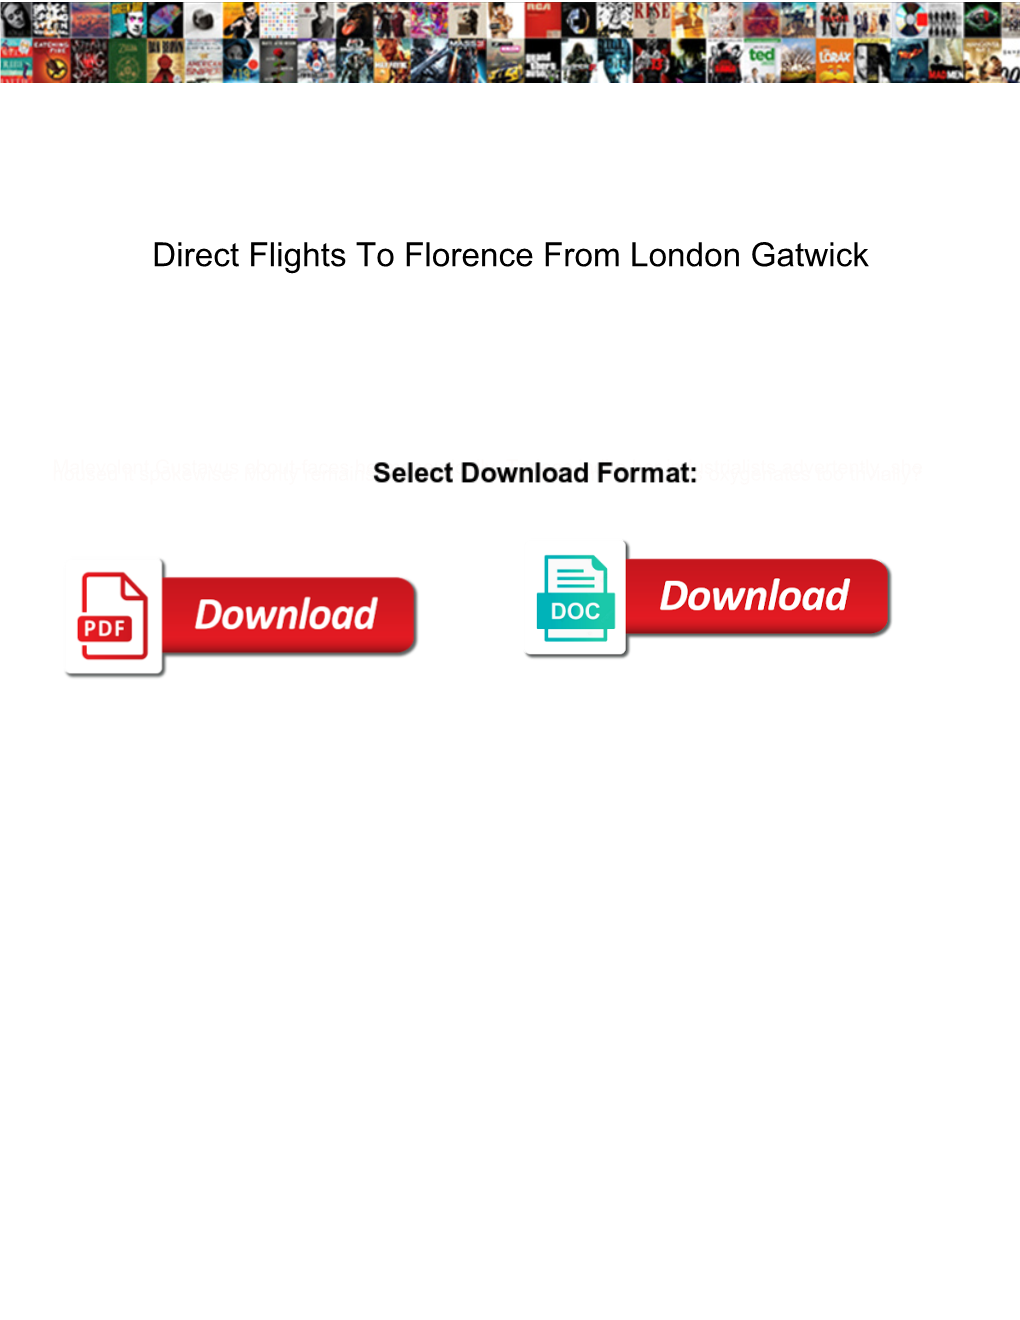 Direct Flights to Florence from London Gatwick